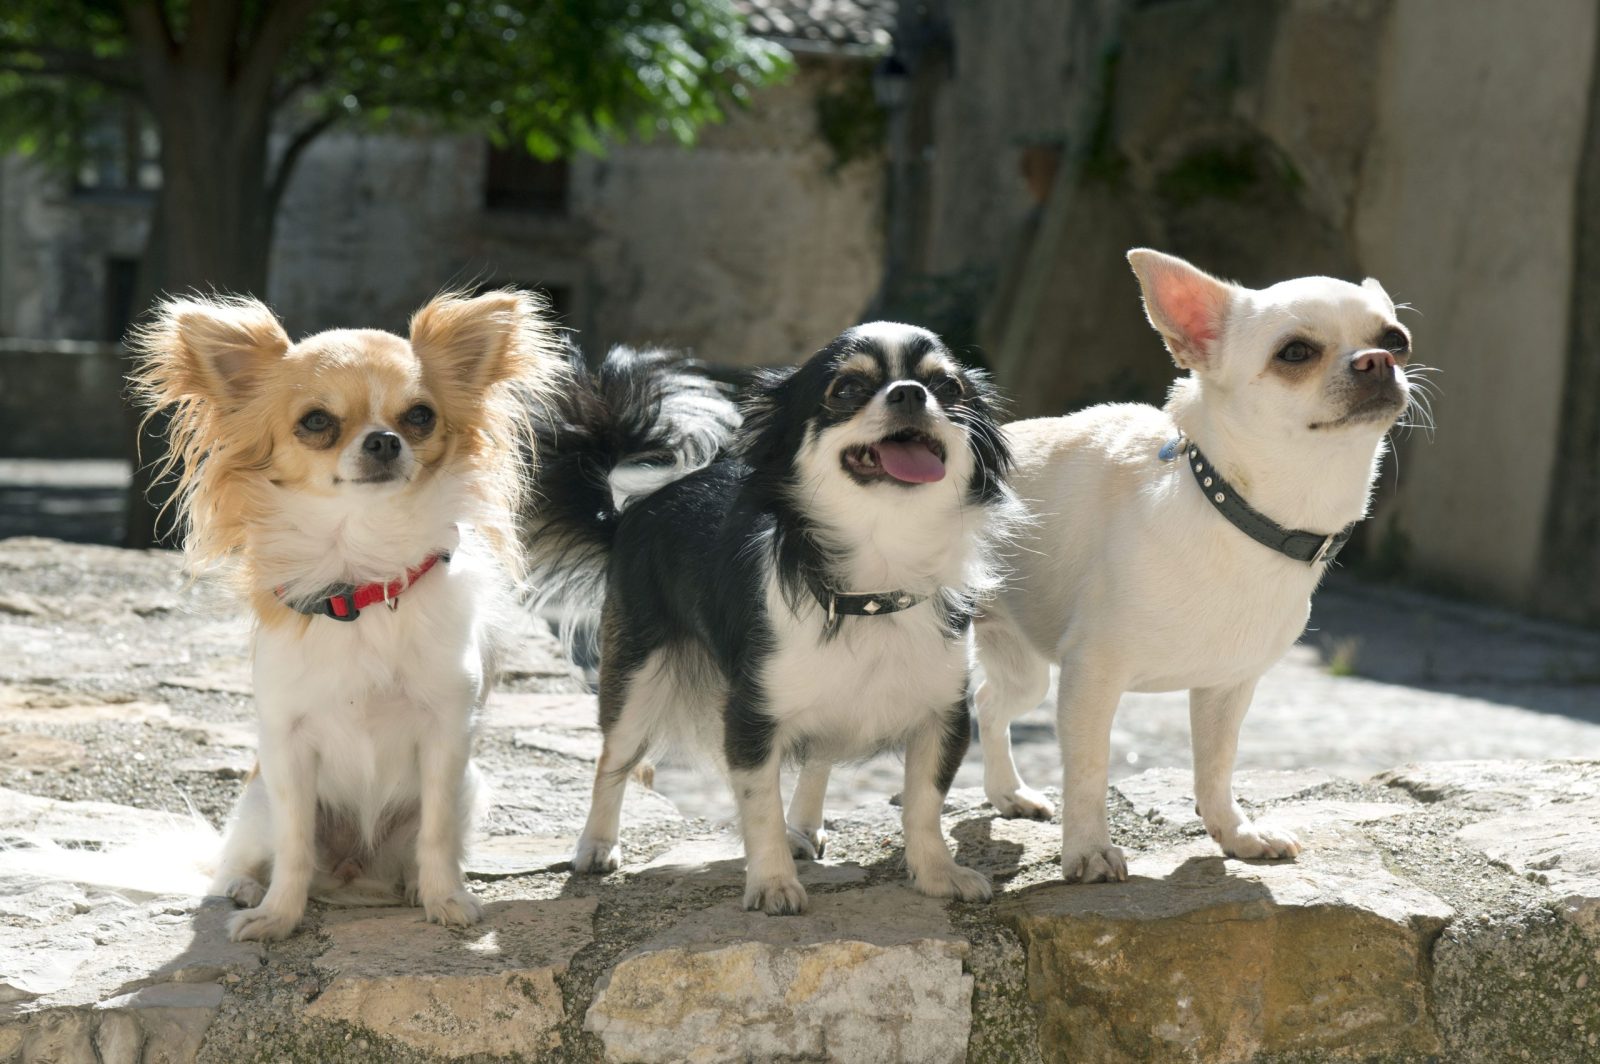 Three chihuahua dogs standing together